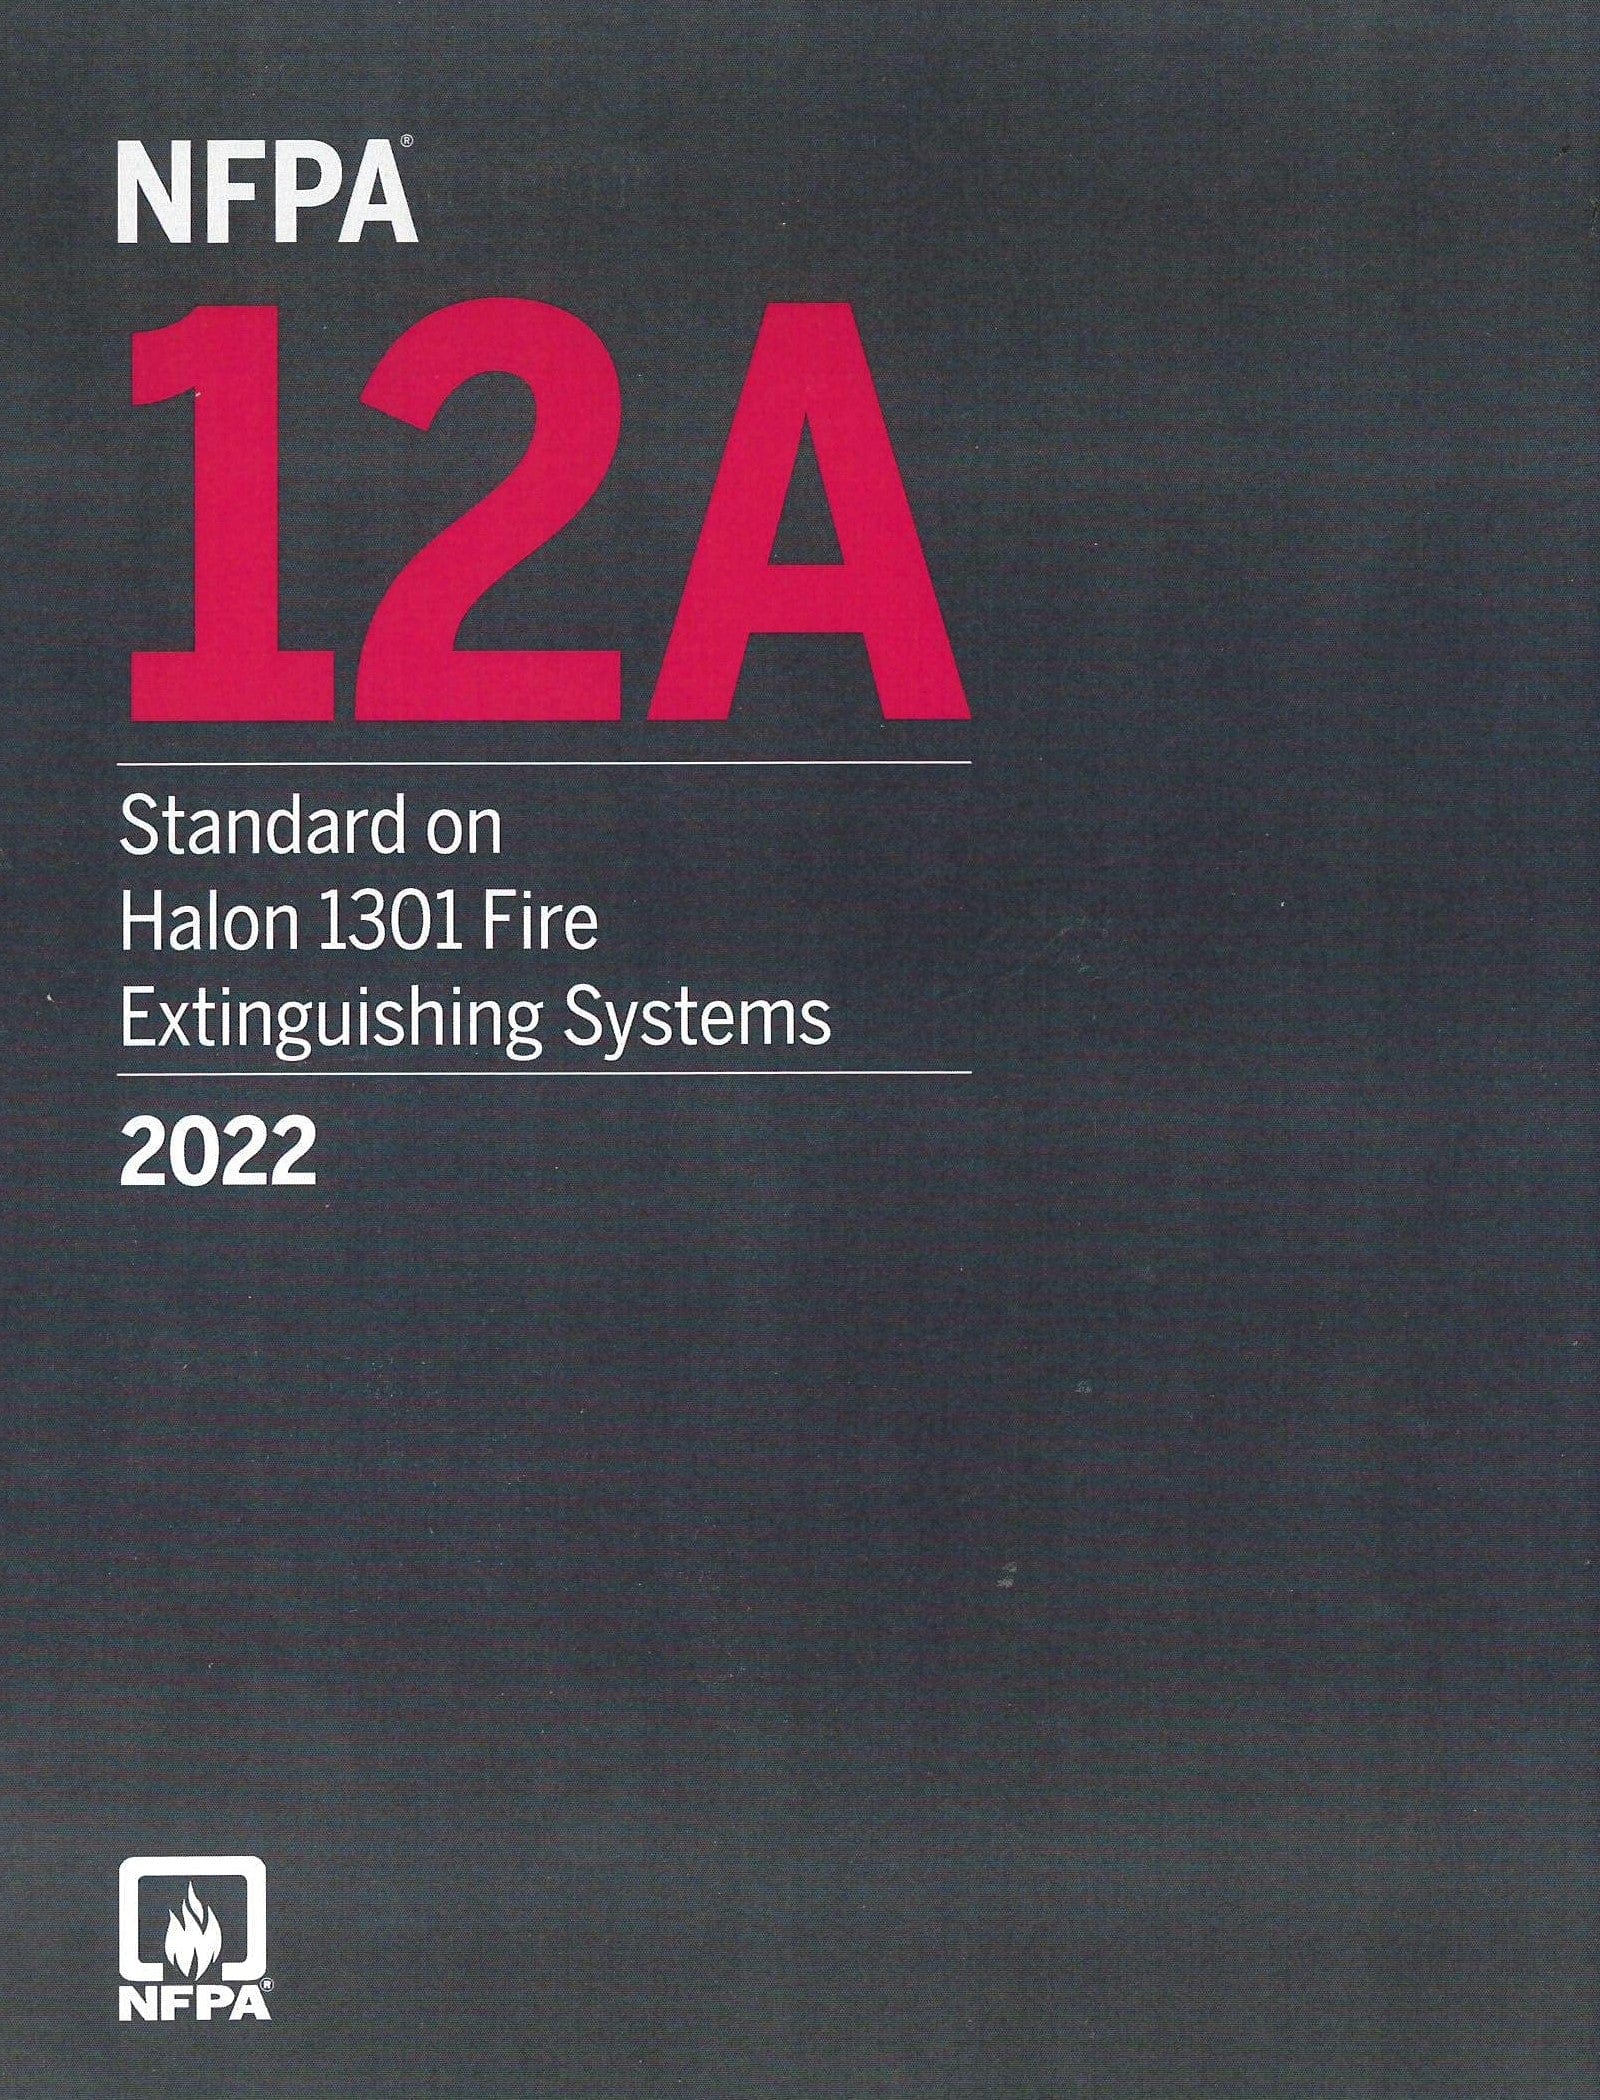 NFPA 12A: Standard on Halon 1301 Fire Extinguishing Systems